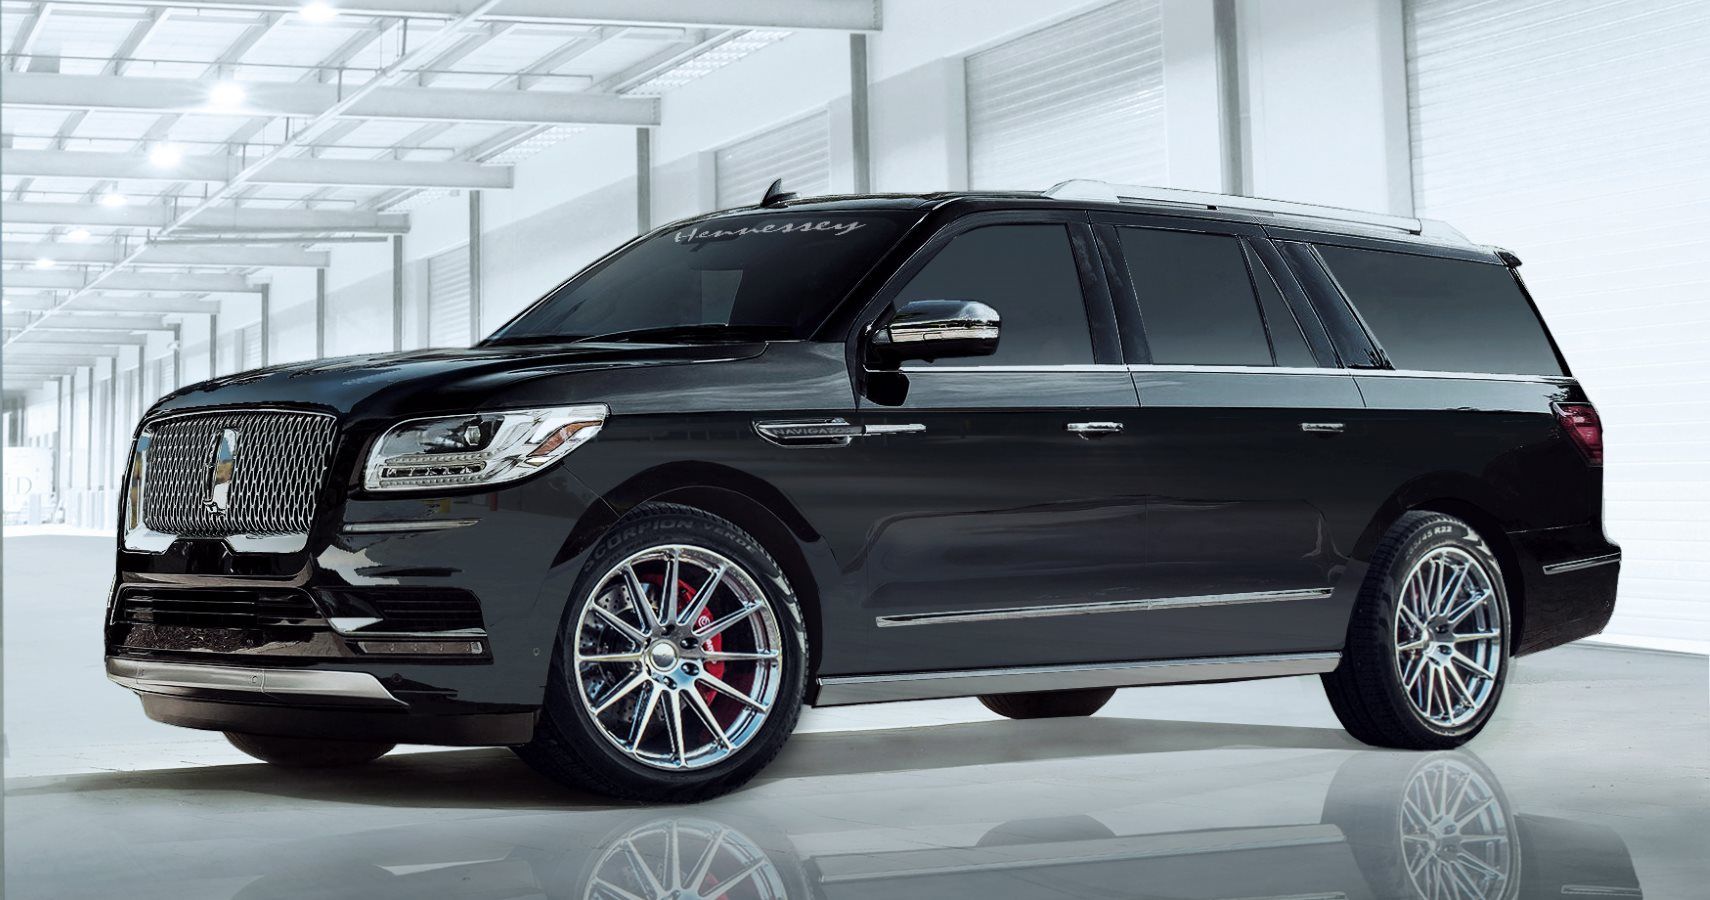 Check Out Hennessey’s 600 HP Lincoln Navigator